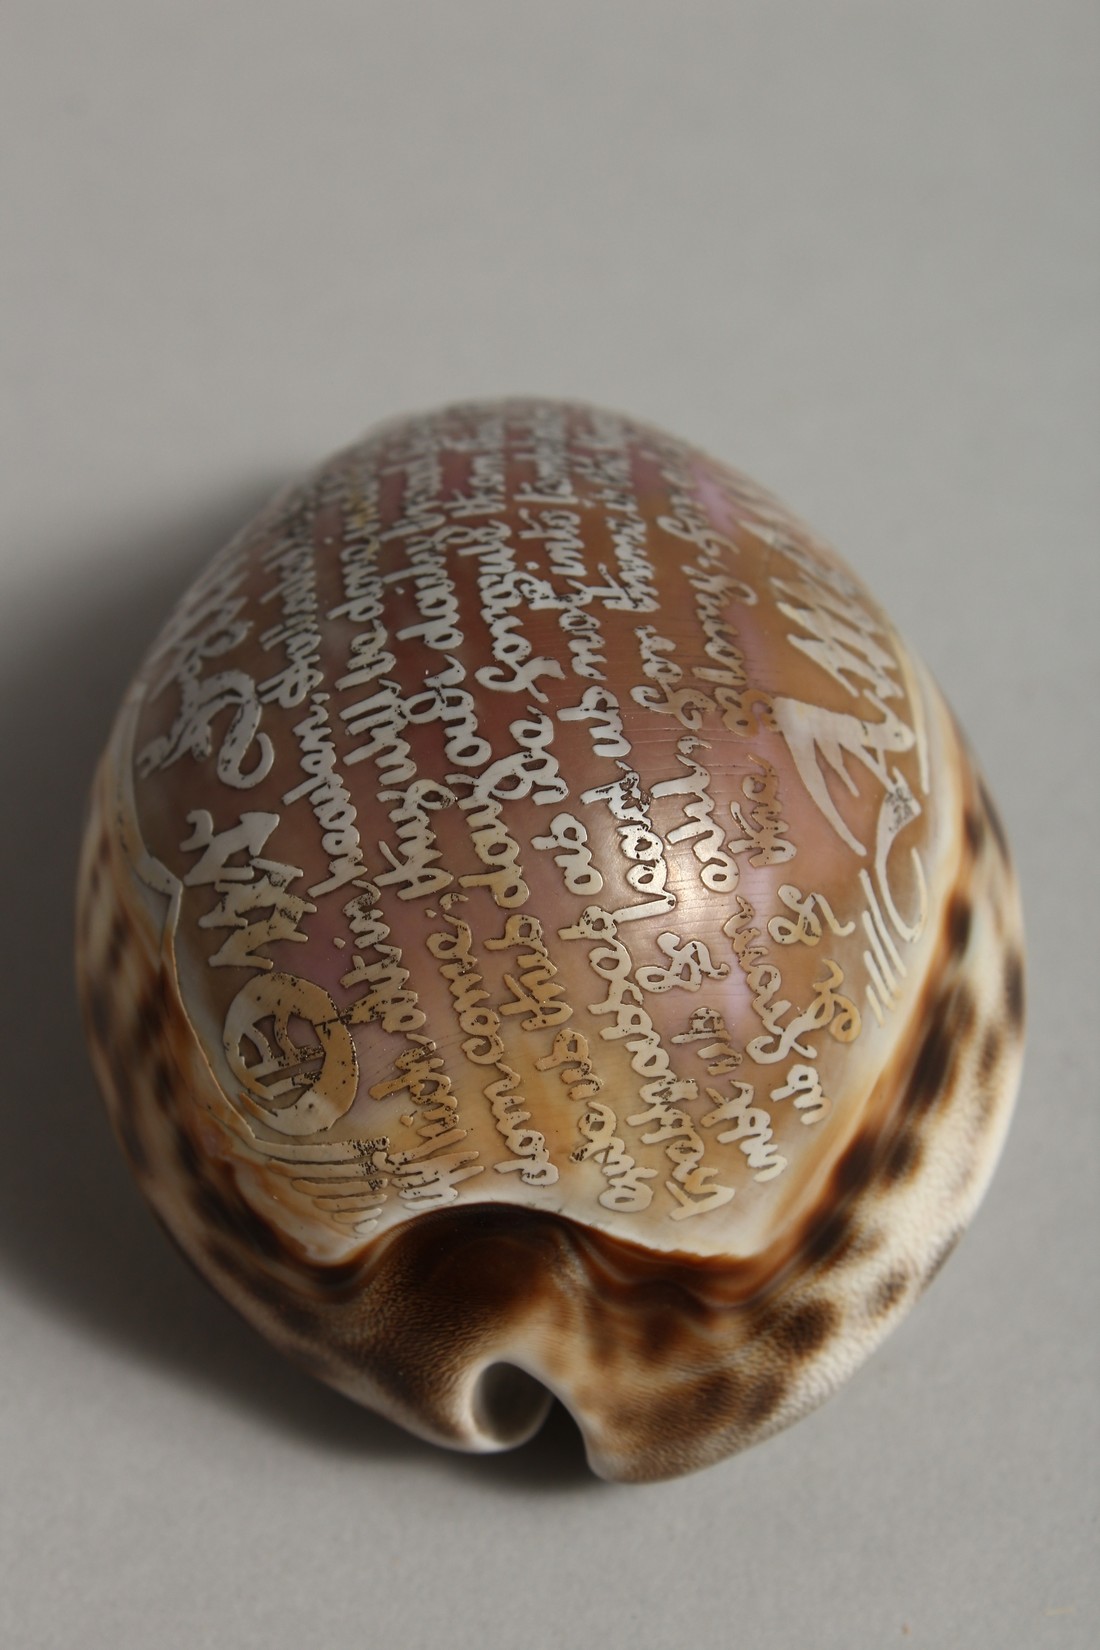 A SHELL CARVED WITH THE LORD'S PRAYER. 3ins. - Image 4 of 7